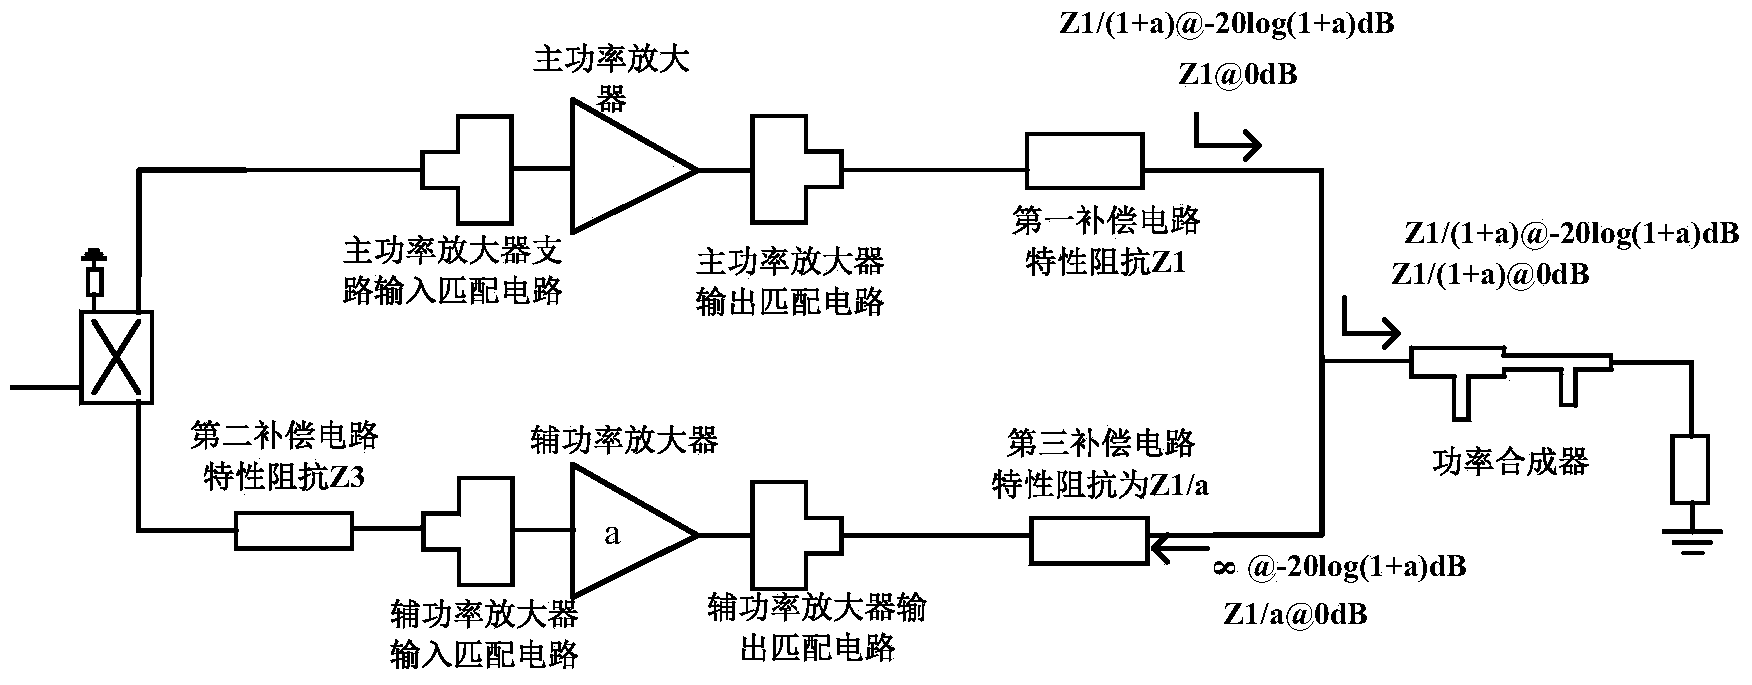 Doherty power amplification circuit